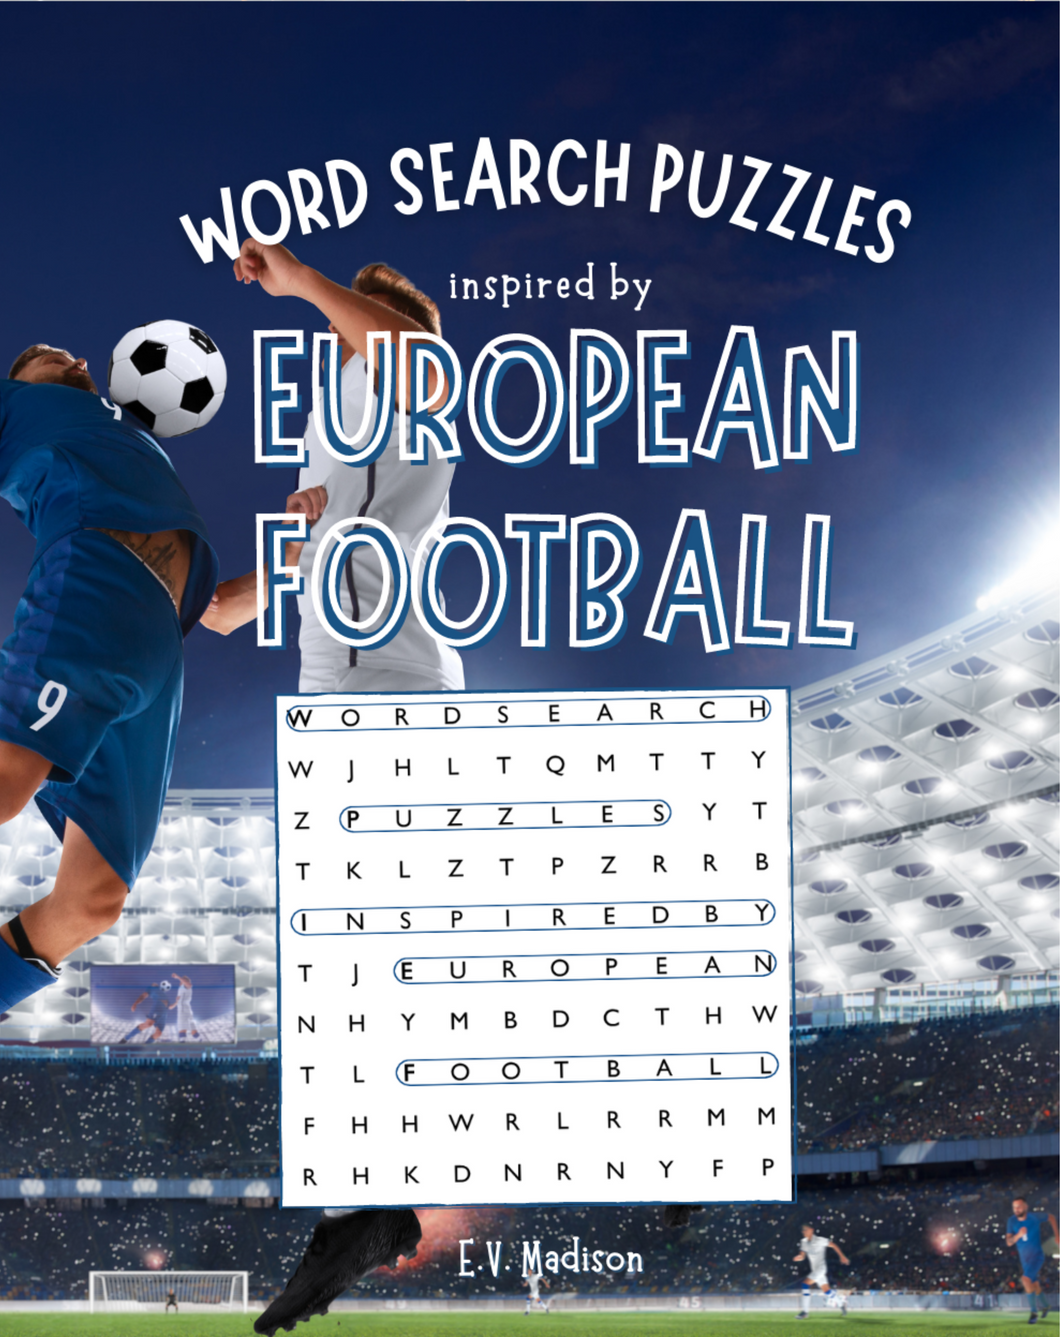 Word Search Puzzles Inspired by European Football